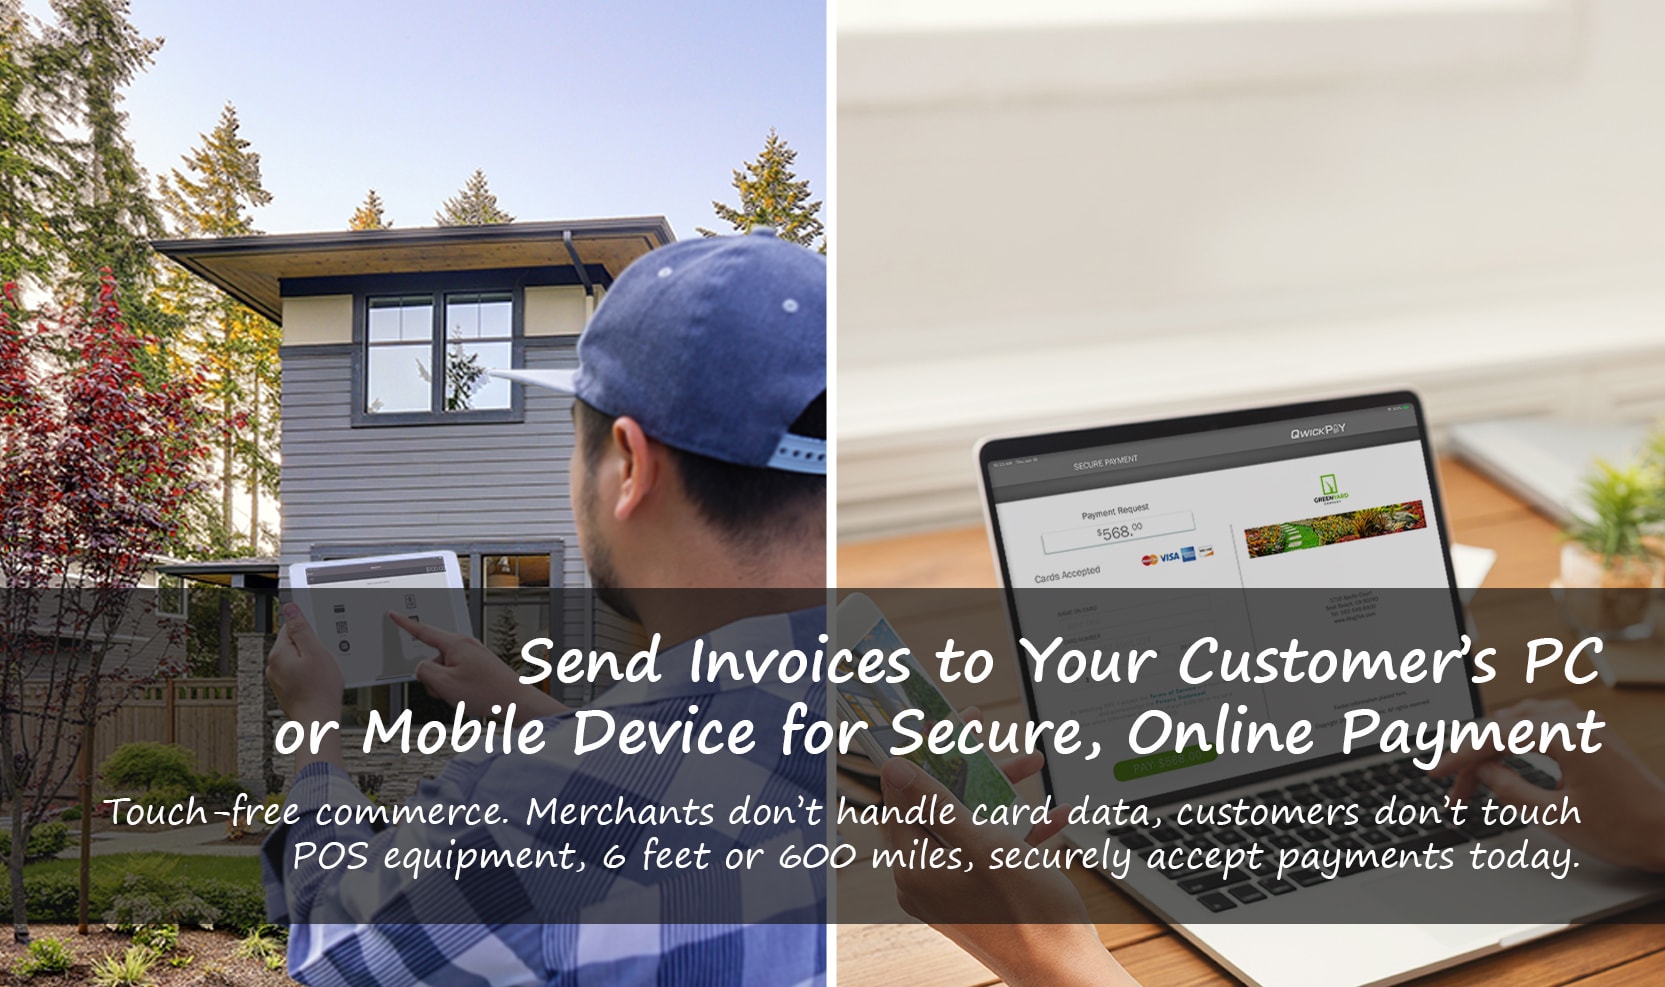 Remotely send invoices directly to your customer's device for immediate payment.